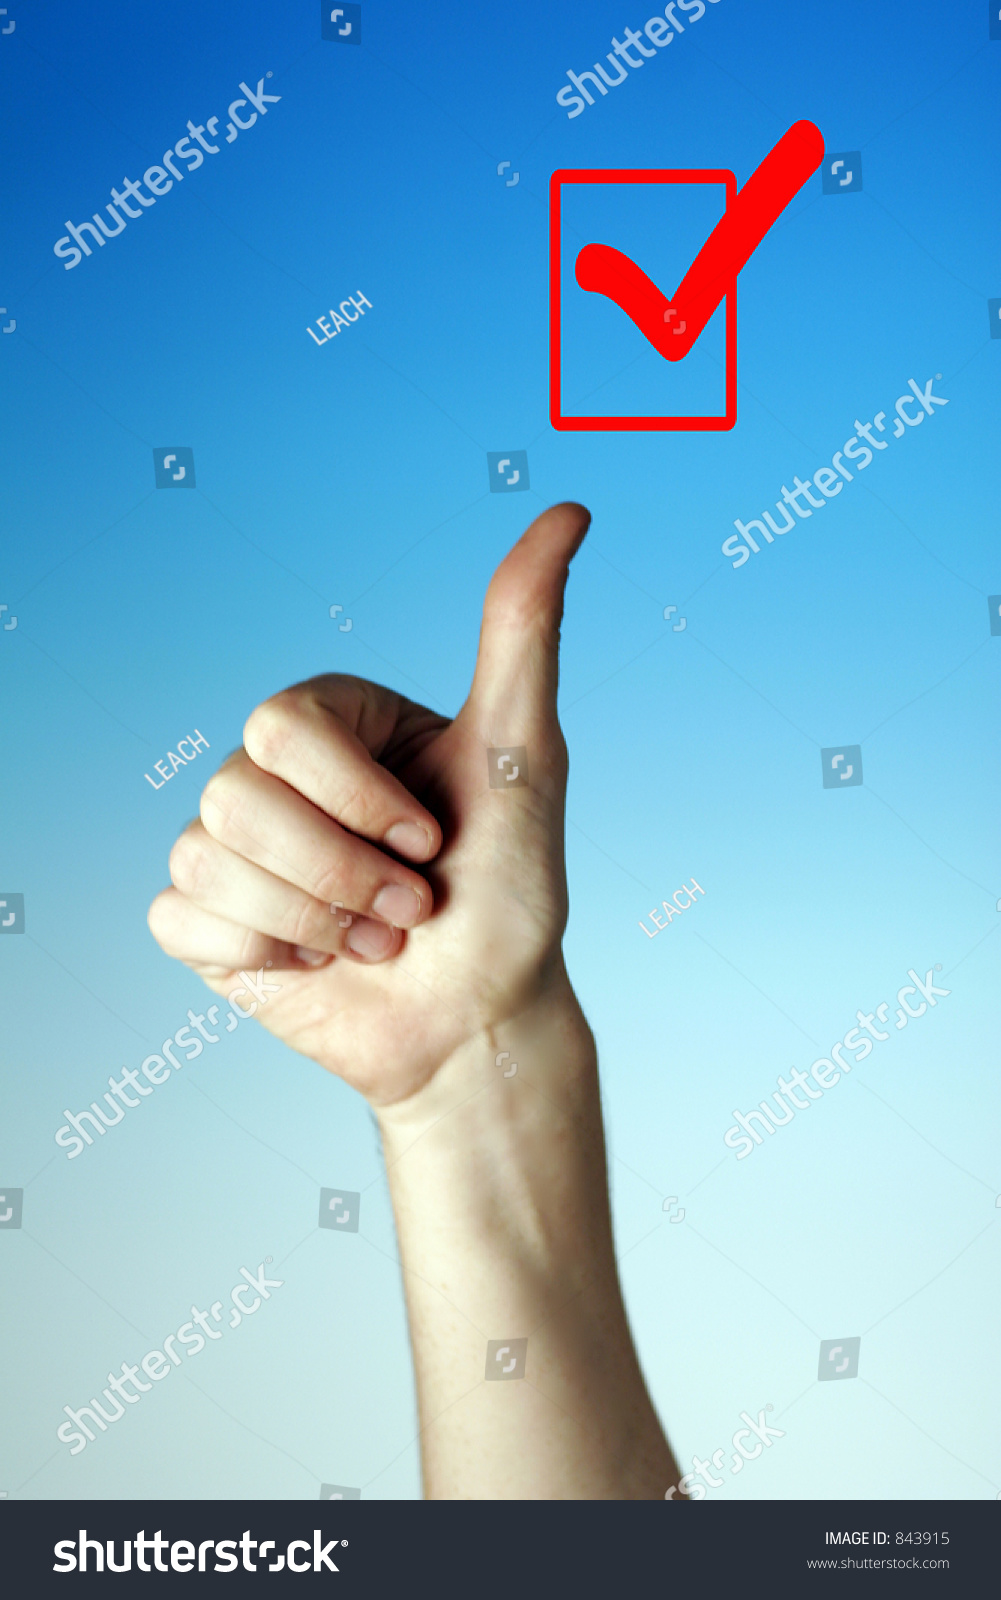 Signs and Symbols for Thumbs Up - Good - Yes - Checked Box #843915